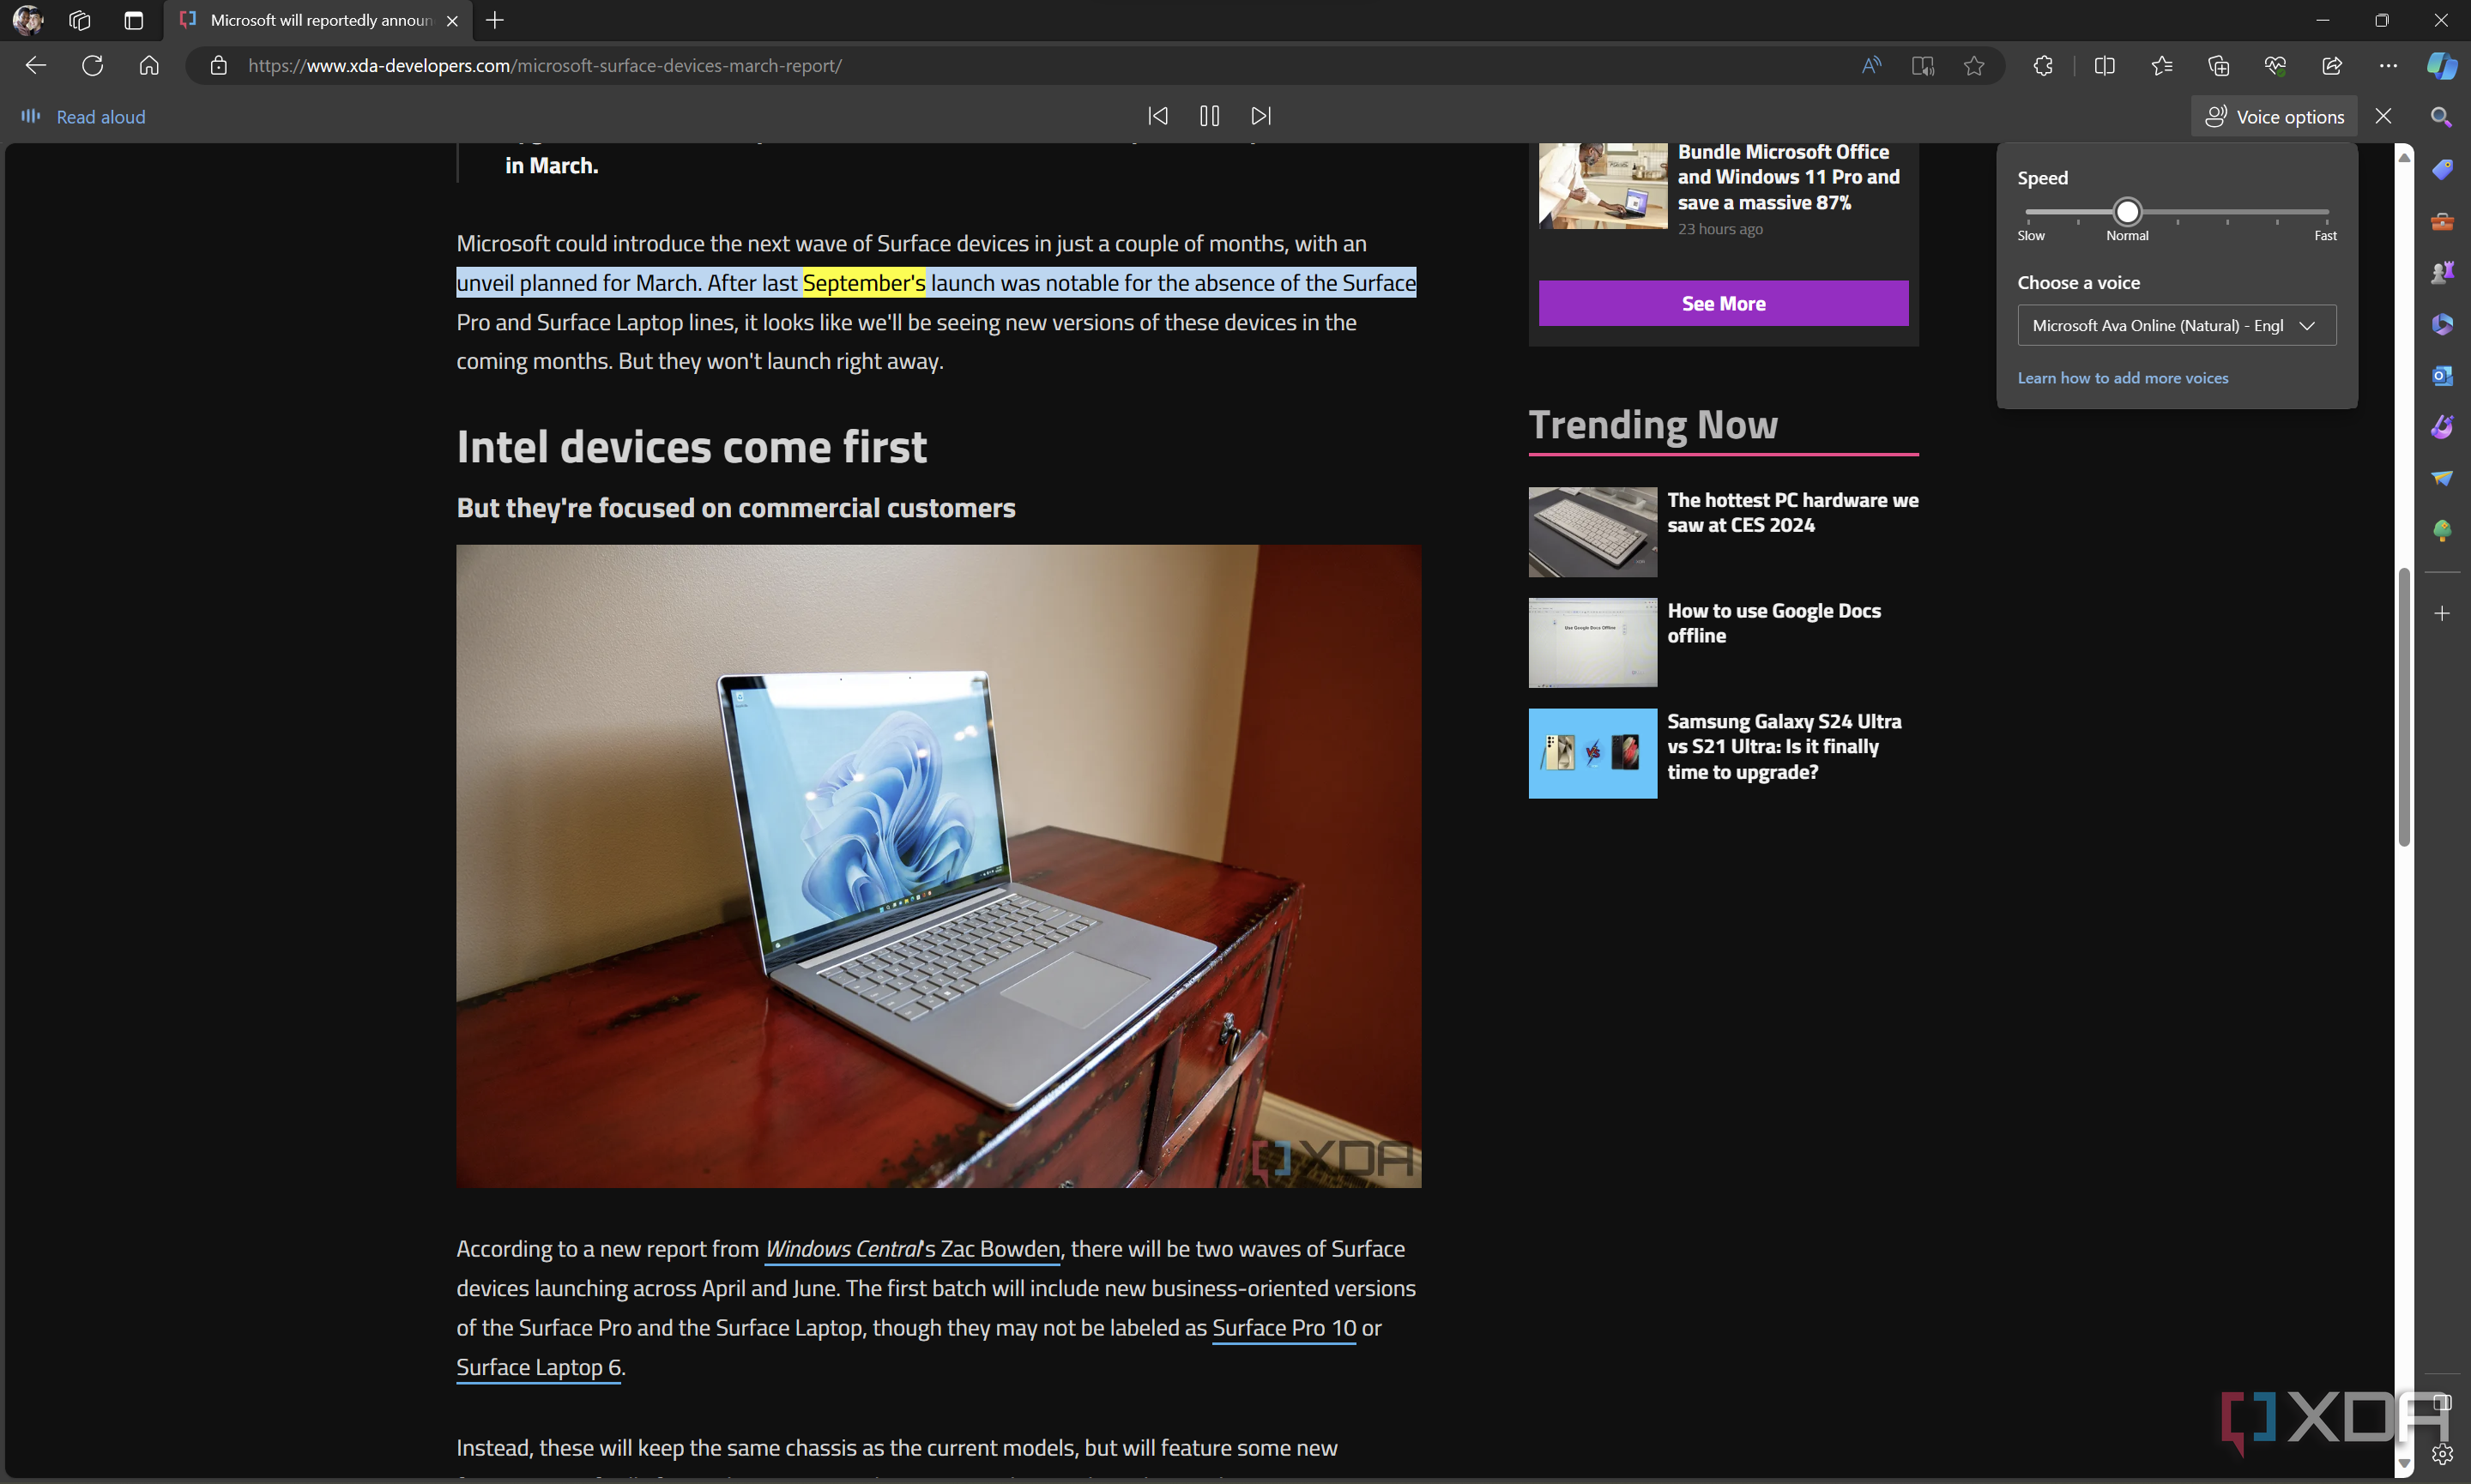 Screenshot of Microsoft Edge with the read aloud feature enabled